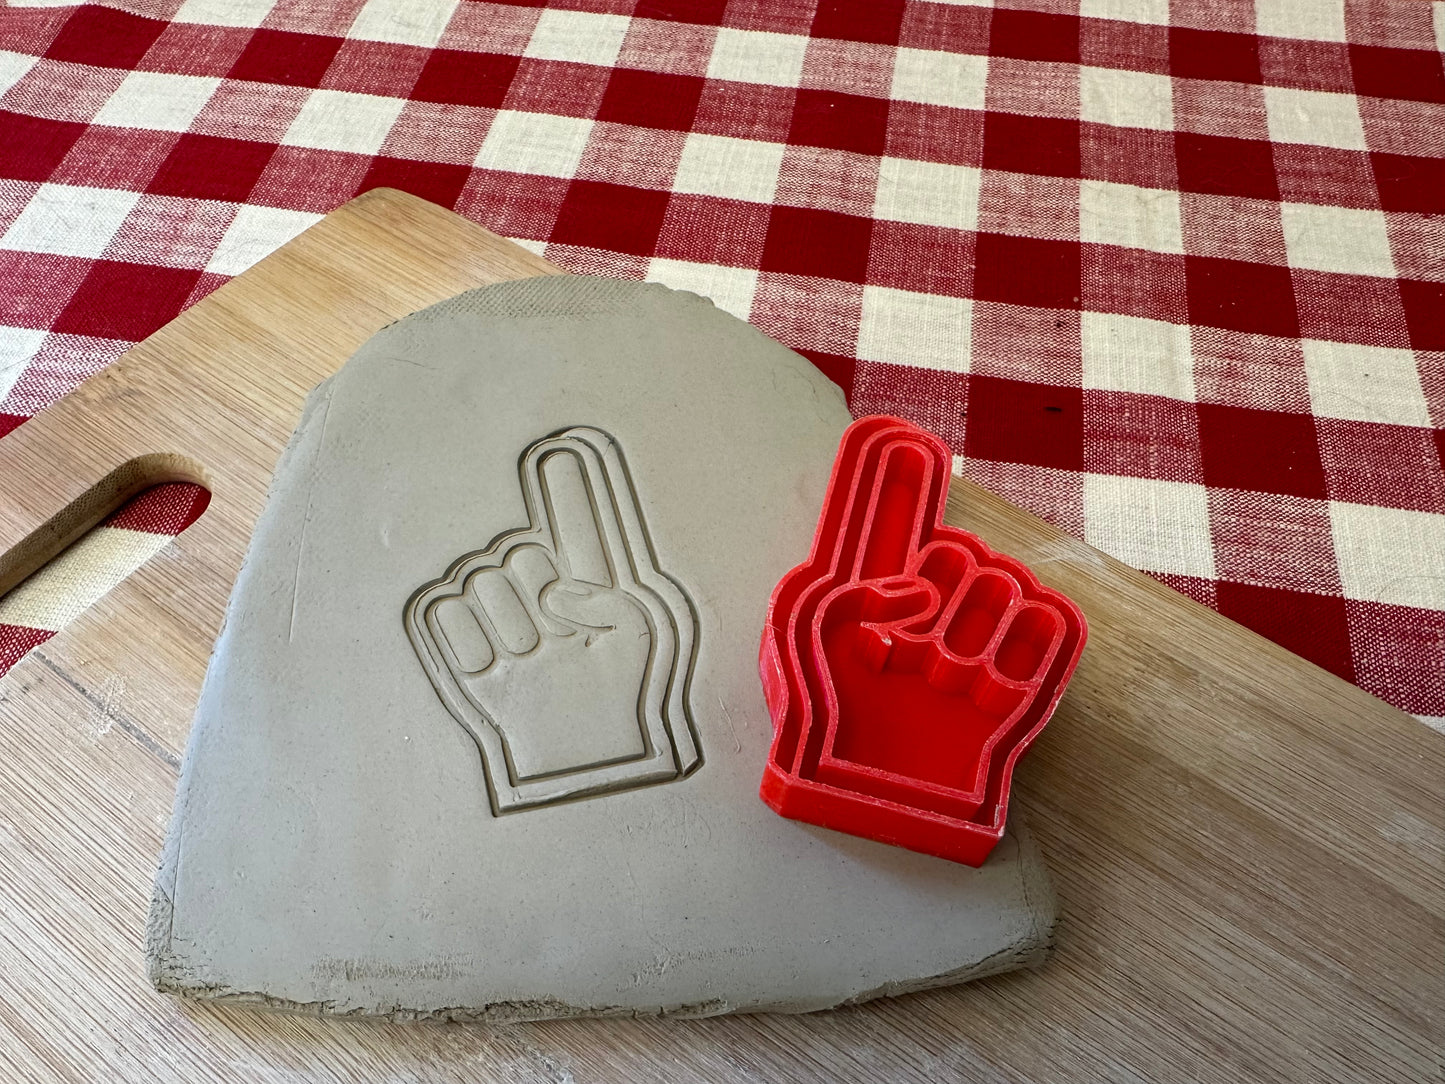 Foam Finger Pottery Stamp - plastic 3D printed, multiple sizes available